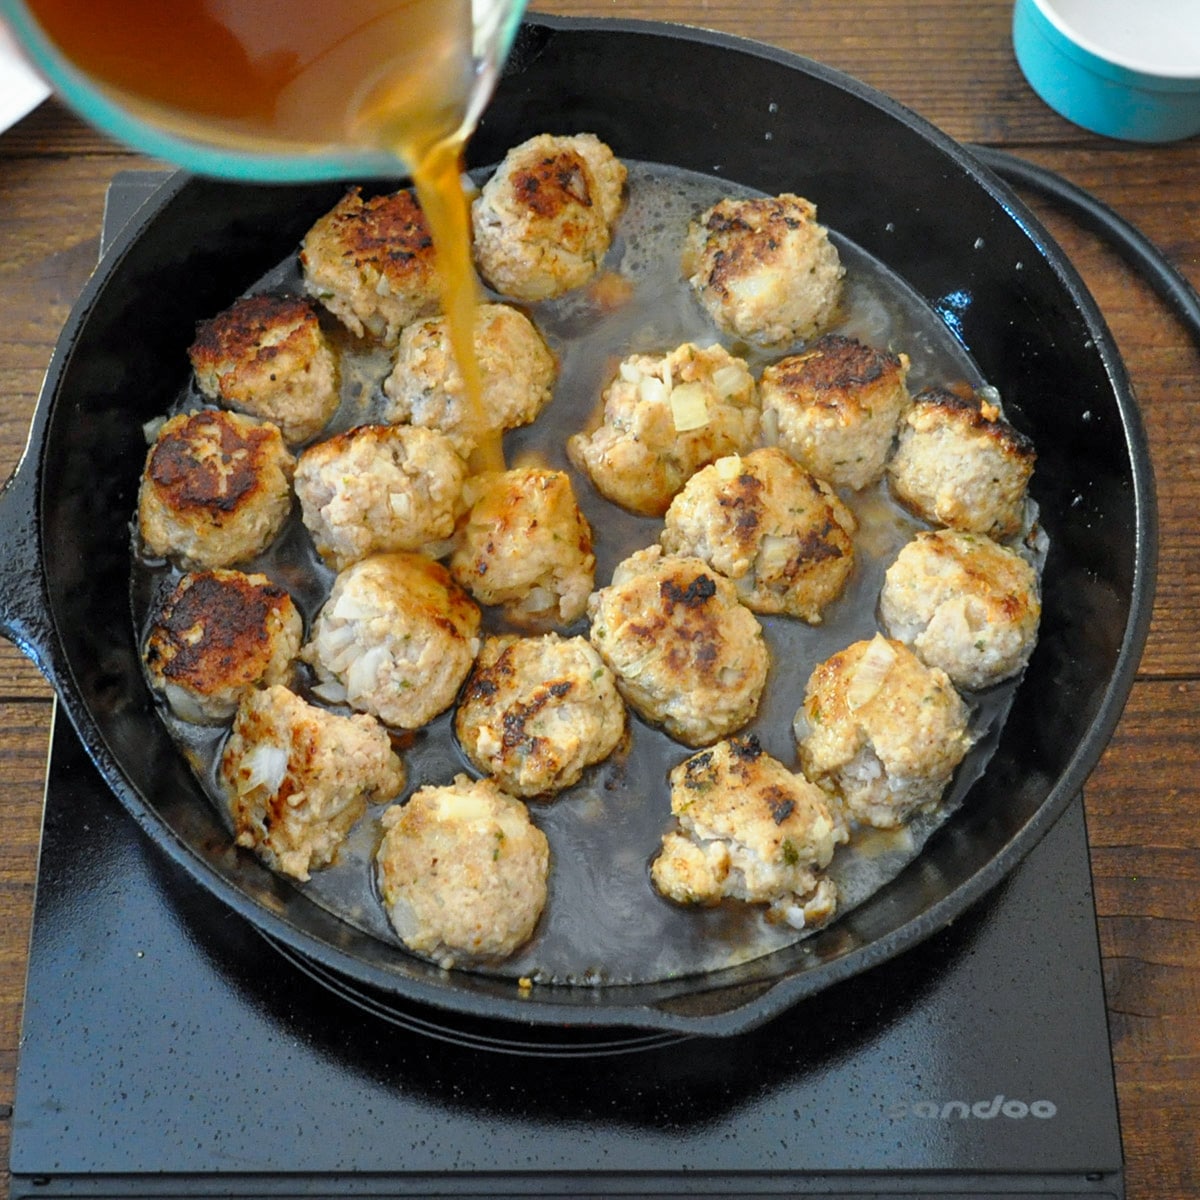 beef broth being poured over meatballs in a black skillet